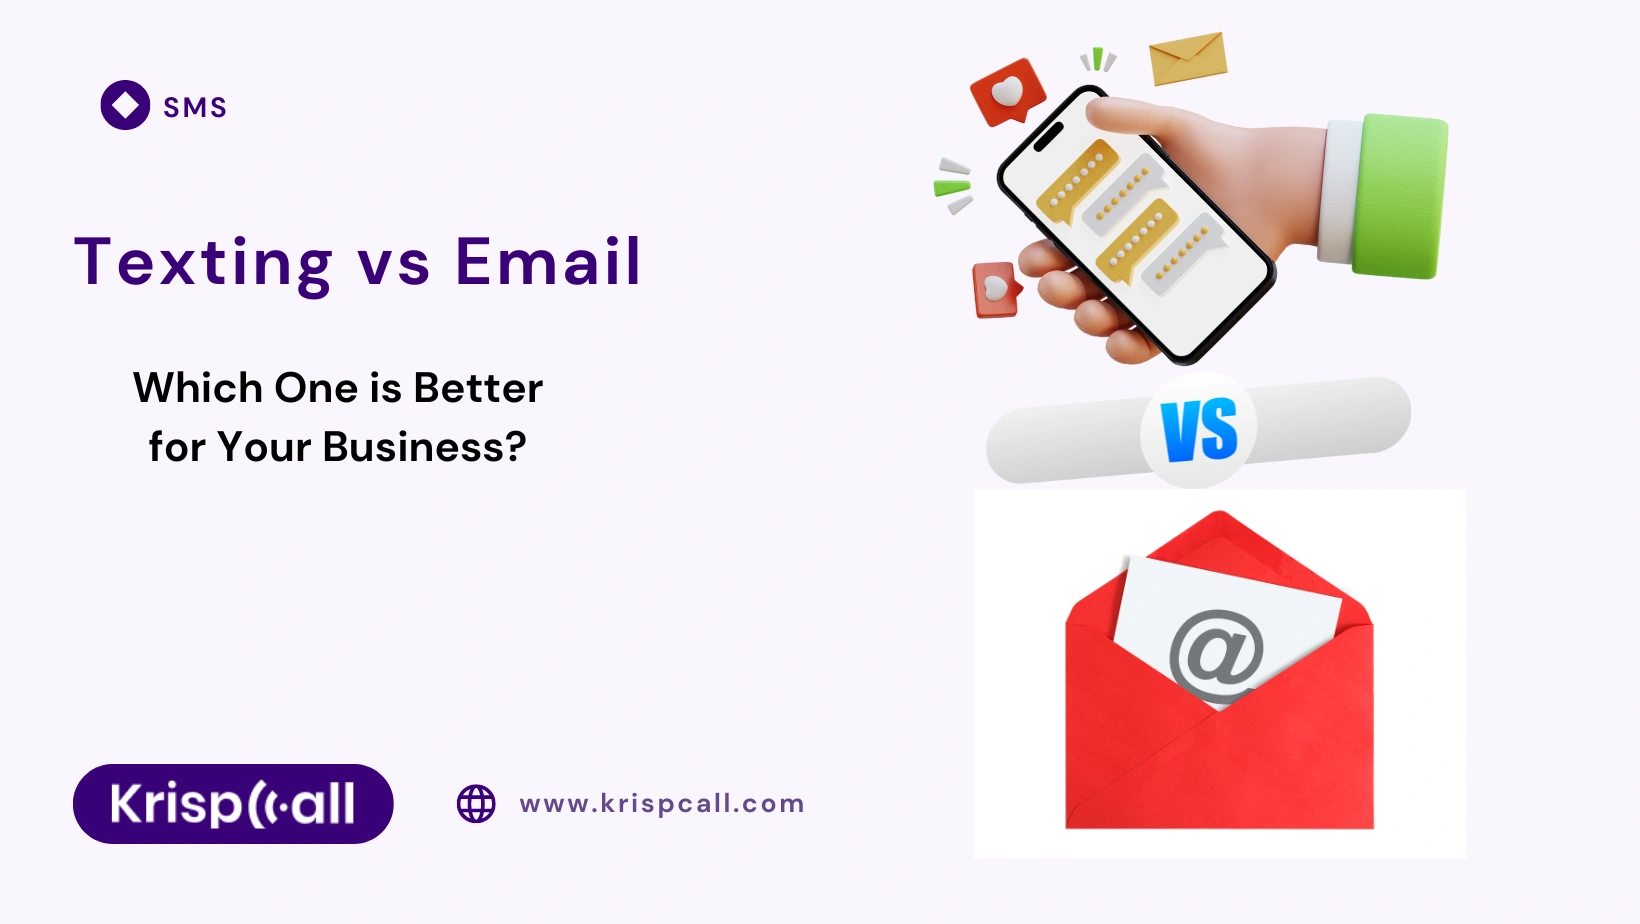 Texting vs email: which one is better for your business